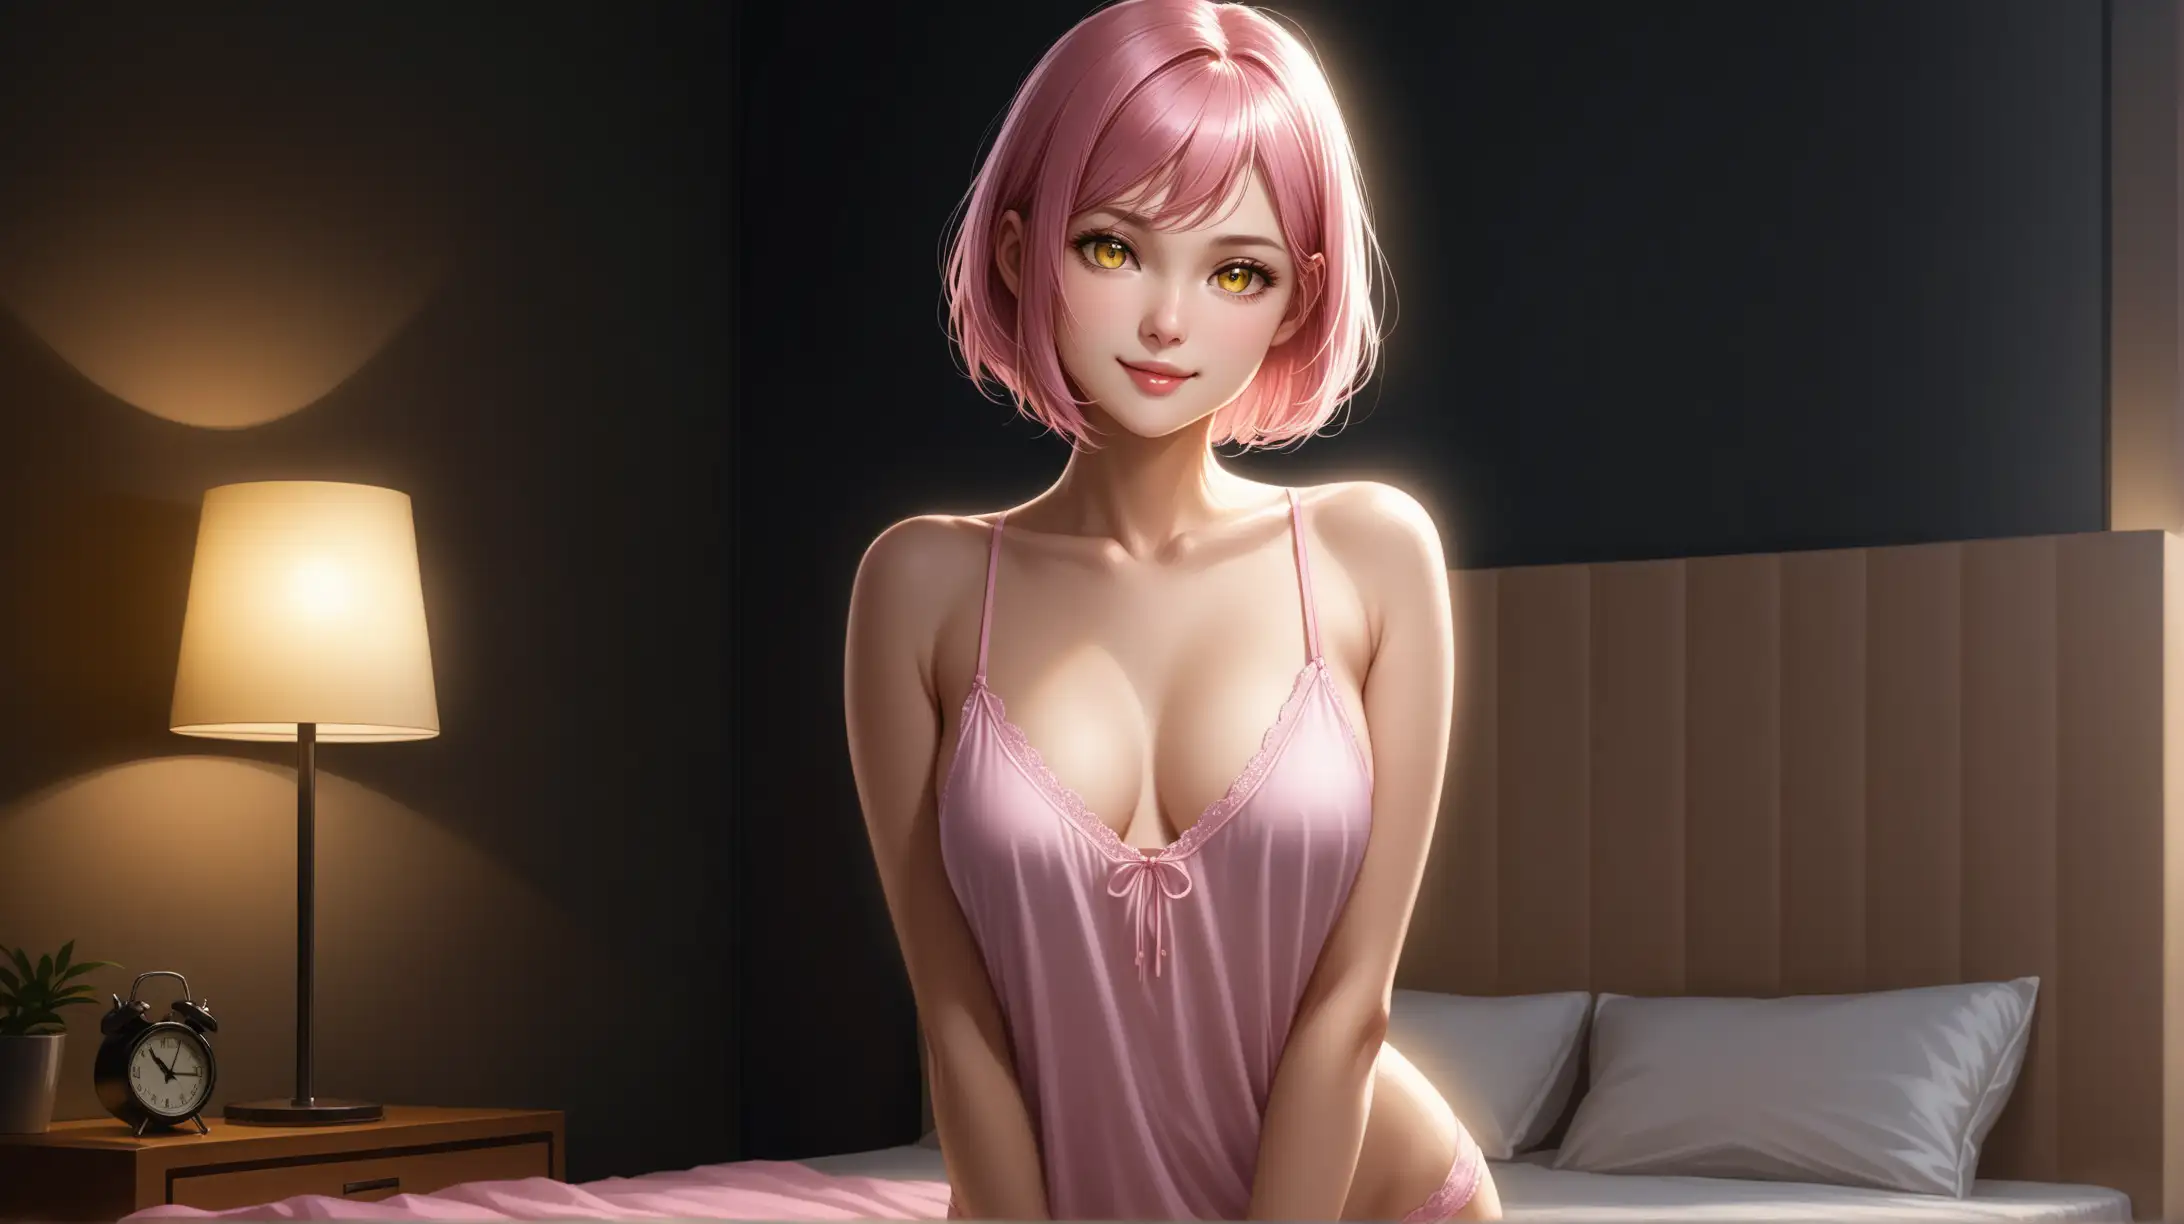 Seductive Woman in Revealing Sleepwear with Pink Hair and Yellow Eyes in Dimly Lit Bedroom at Night